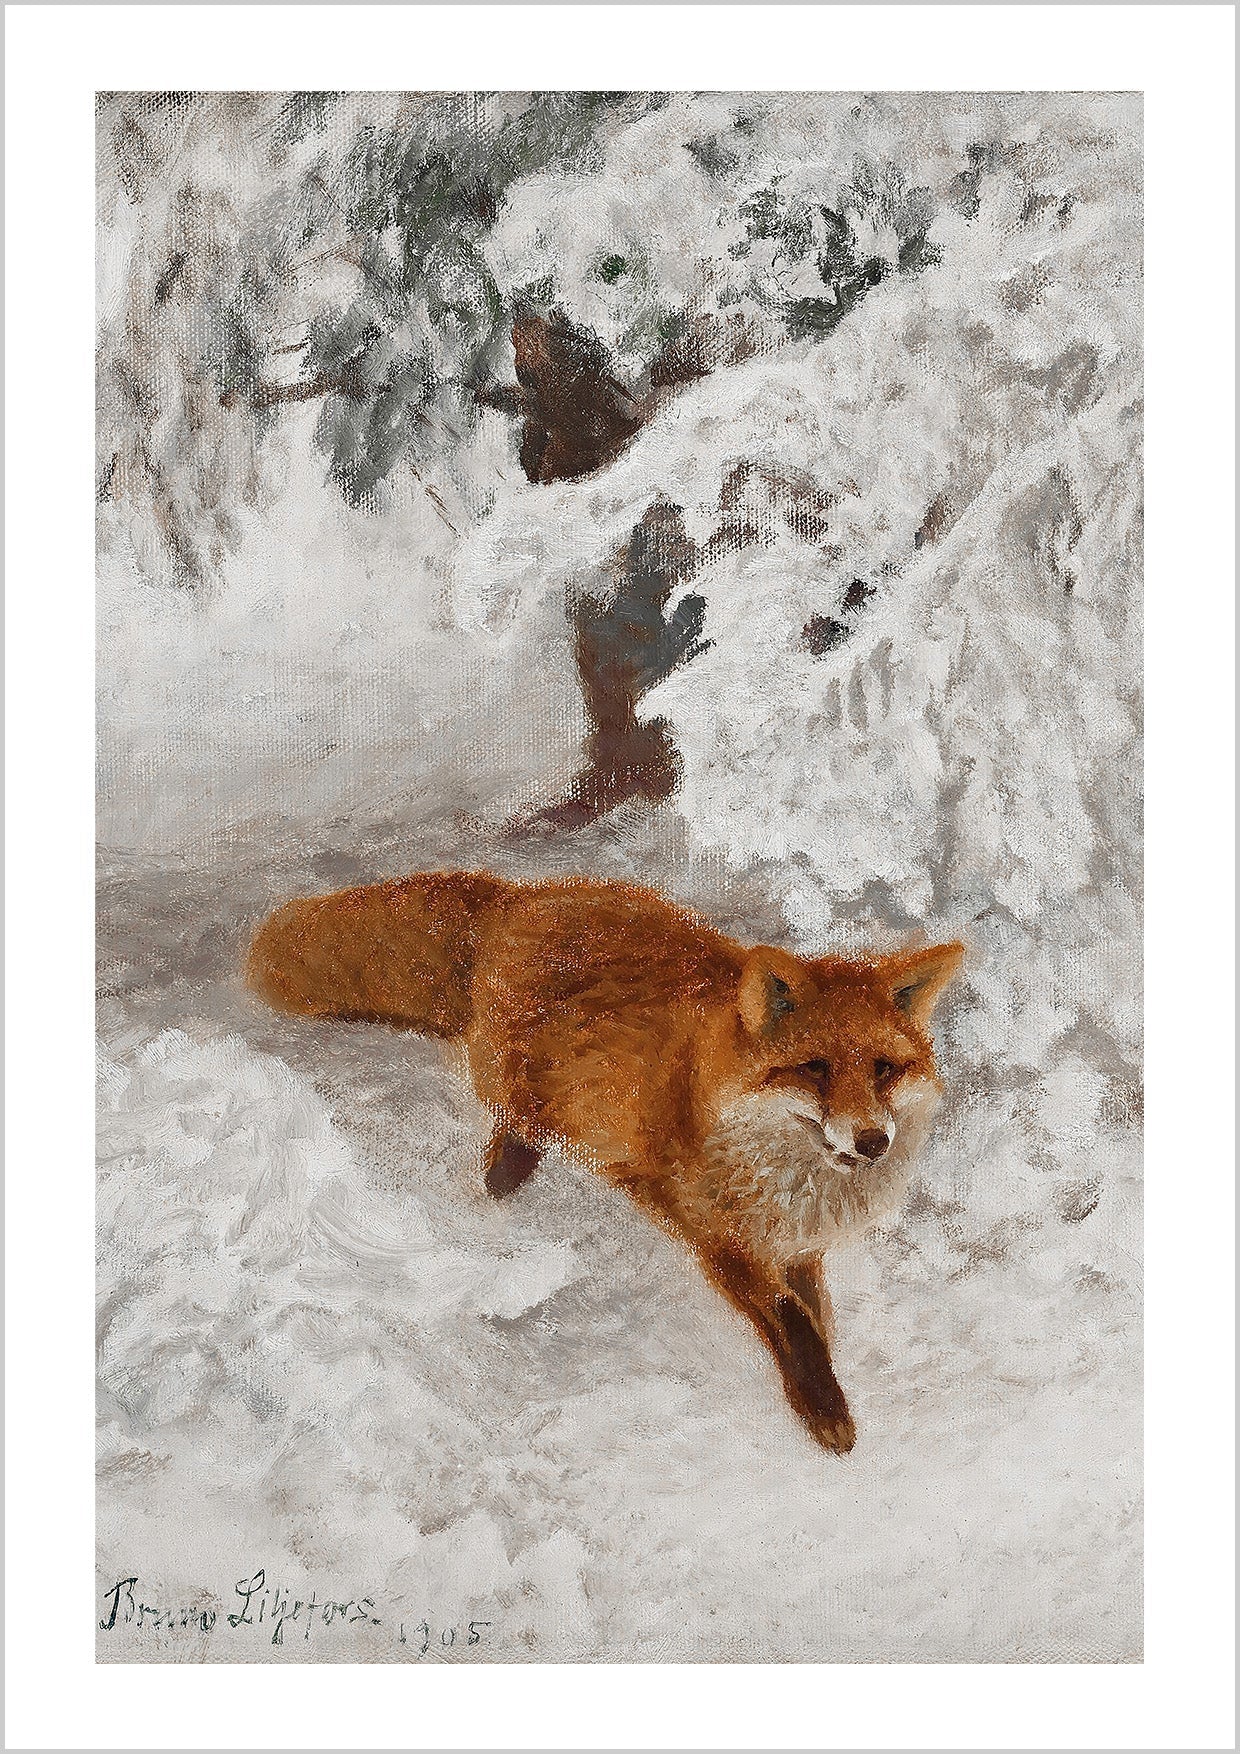 A vintage painting of "Red Fox" in winter landscape by the Swedish artist Bruno Liljefors. 